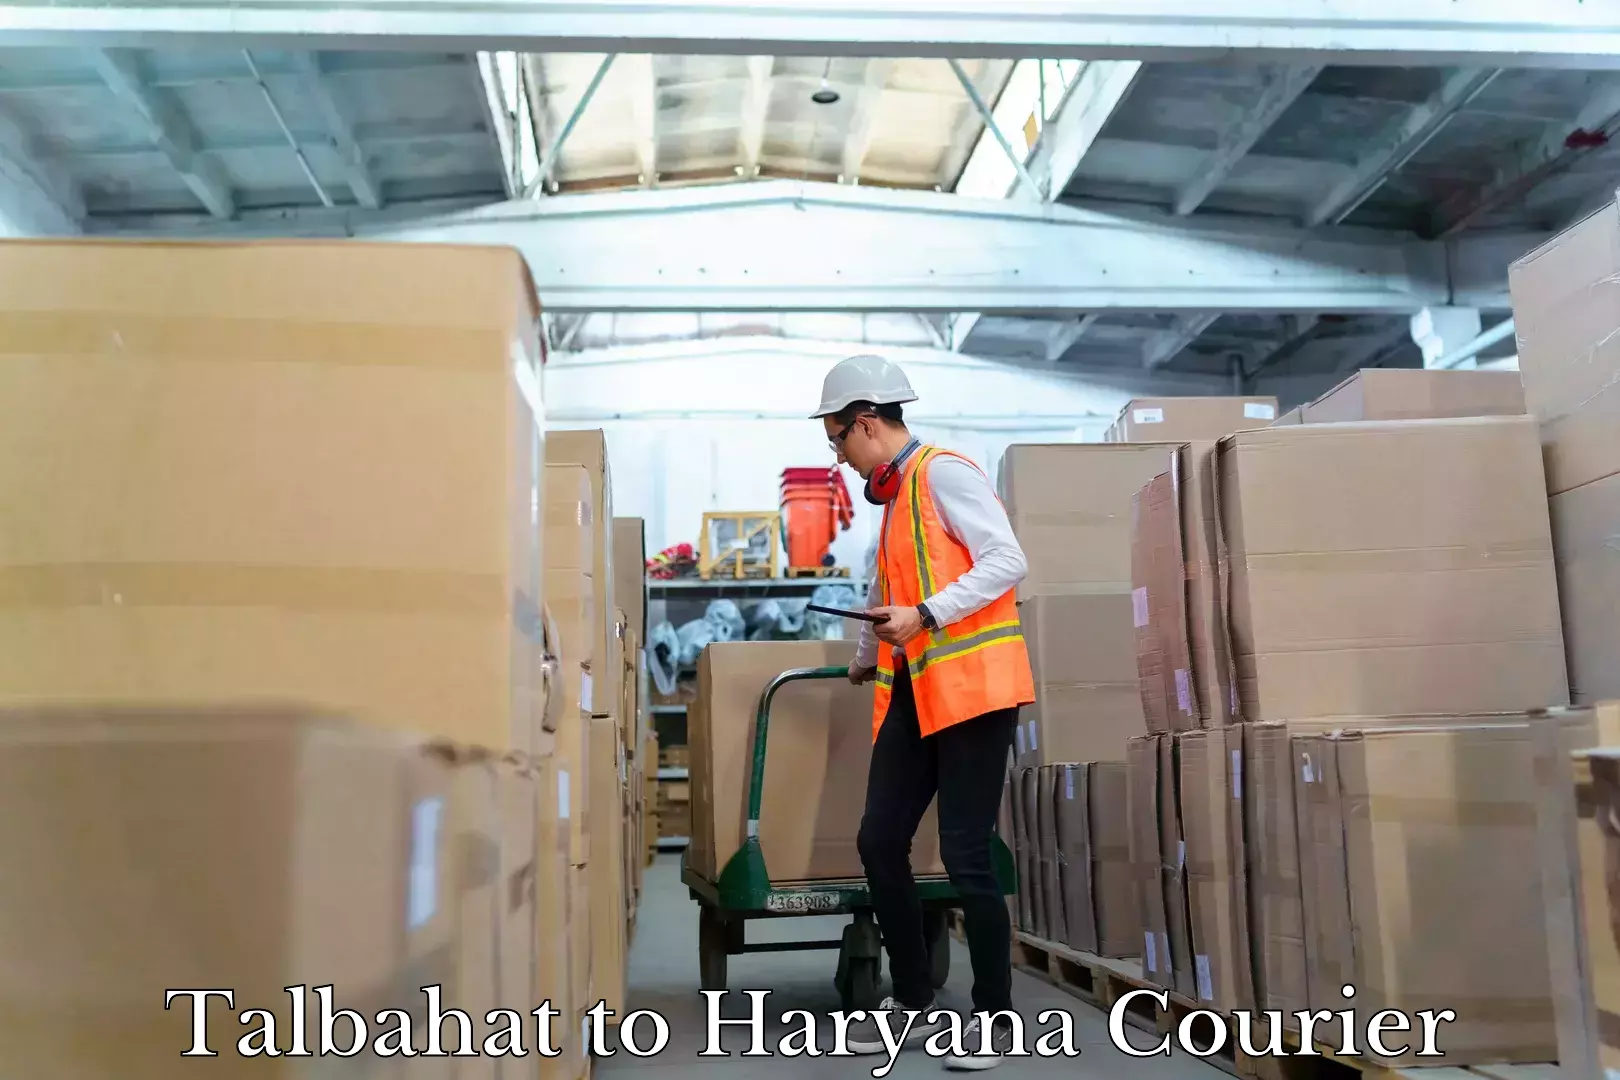 Small business couriers Talbahat to Haryana